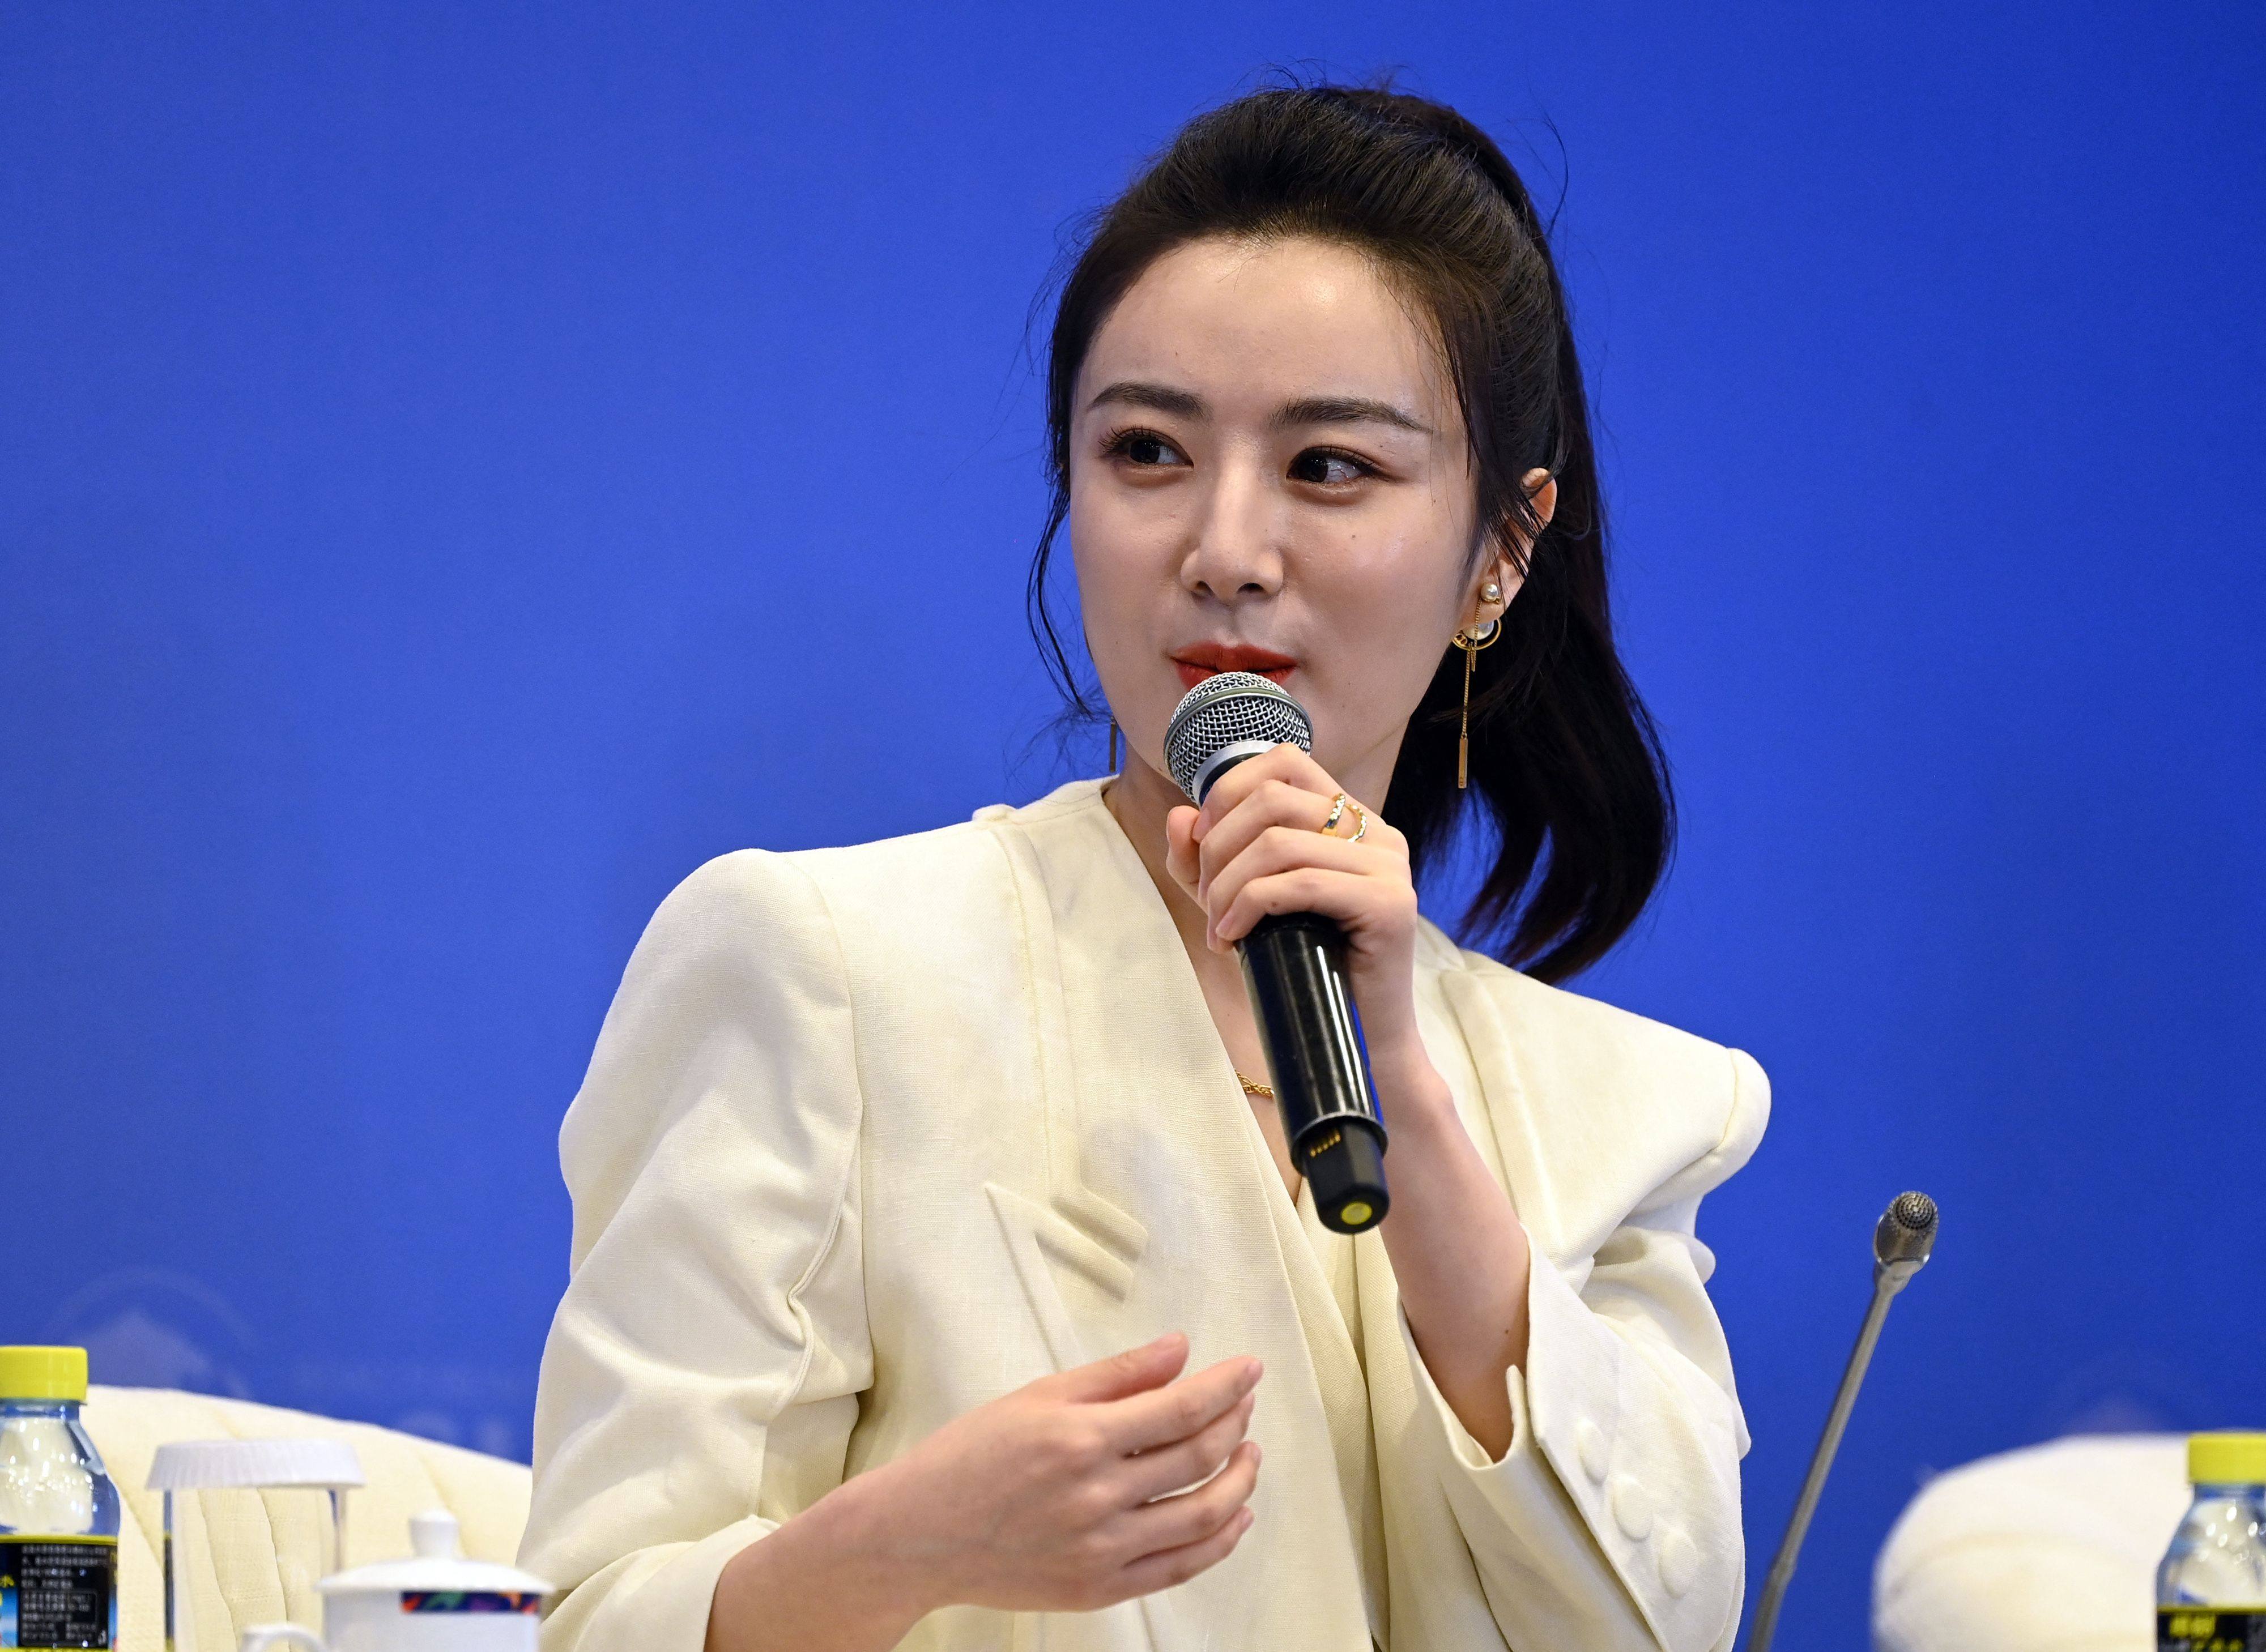 This photo taken on April 20, 2021 shows e-commerce live-streamer Huang Wei, also known as Viya, speaking during the Boao Forum for Asia (BFA) in south China’s Hainan province. Photo: AFP